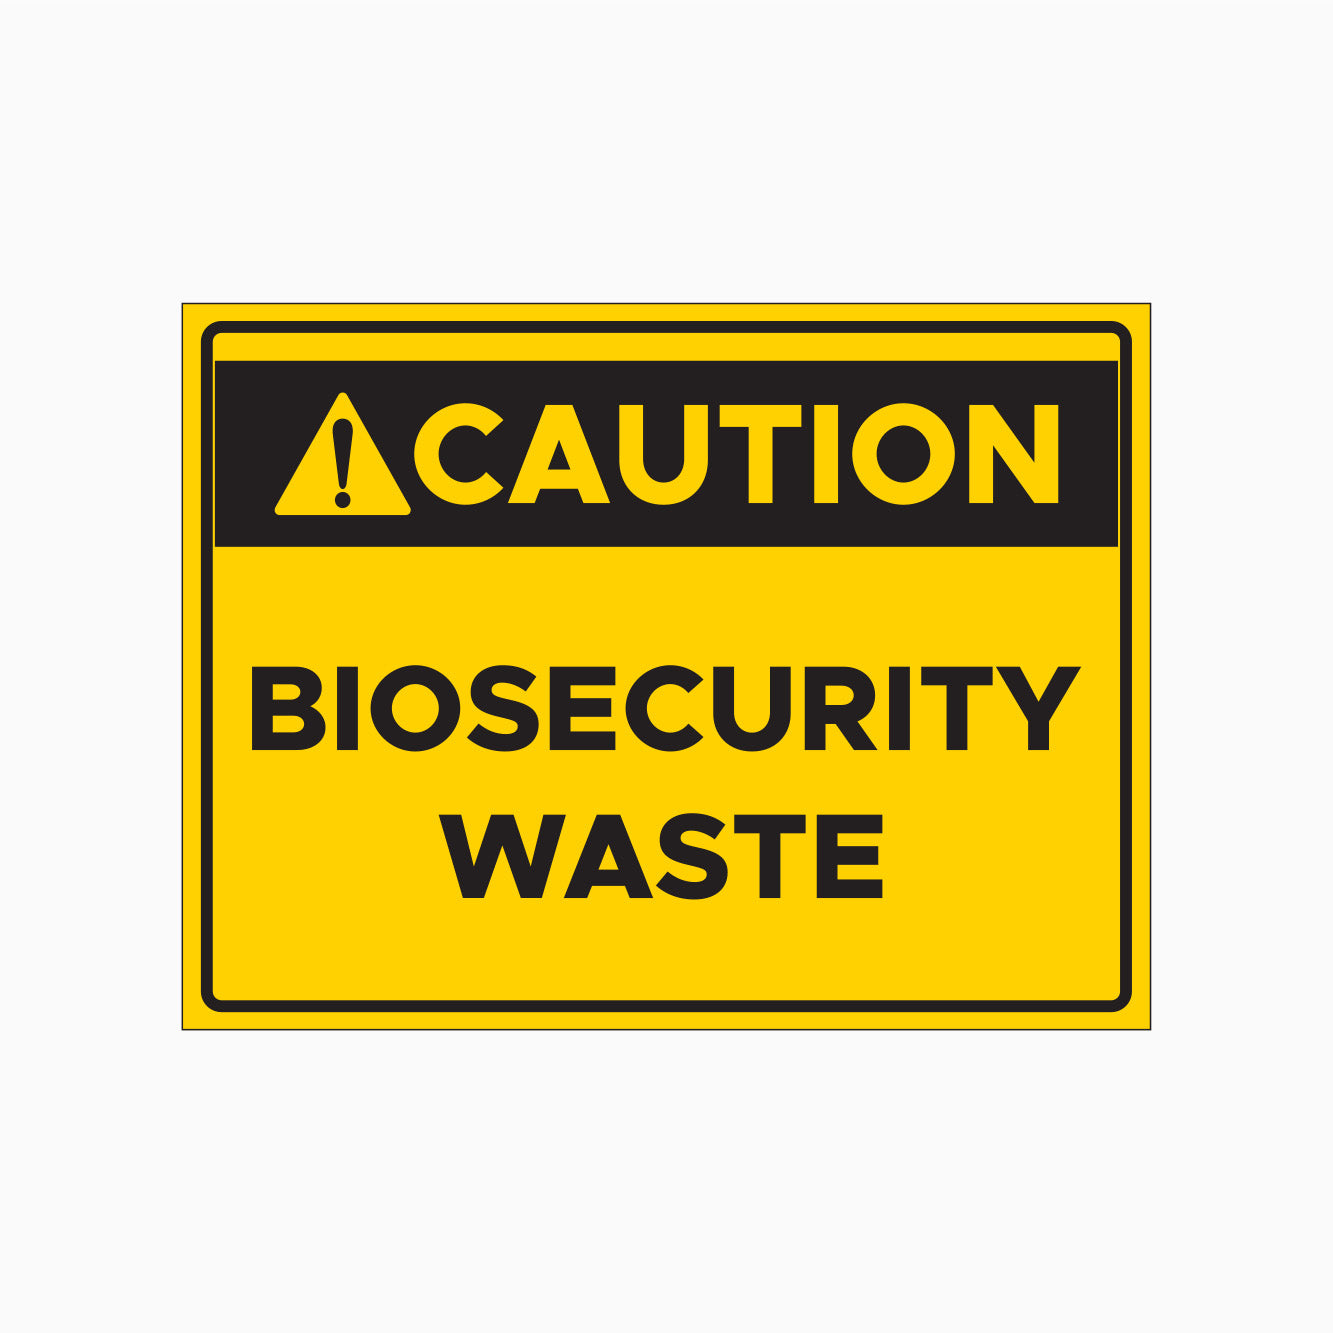 CAUTION SIGN - BIOSECURITY WASTE SIGN